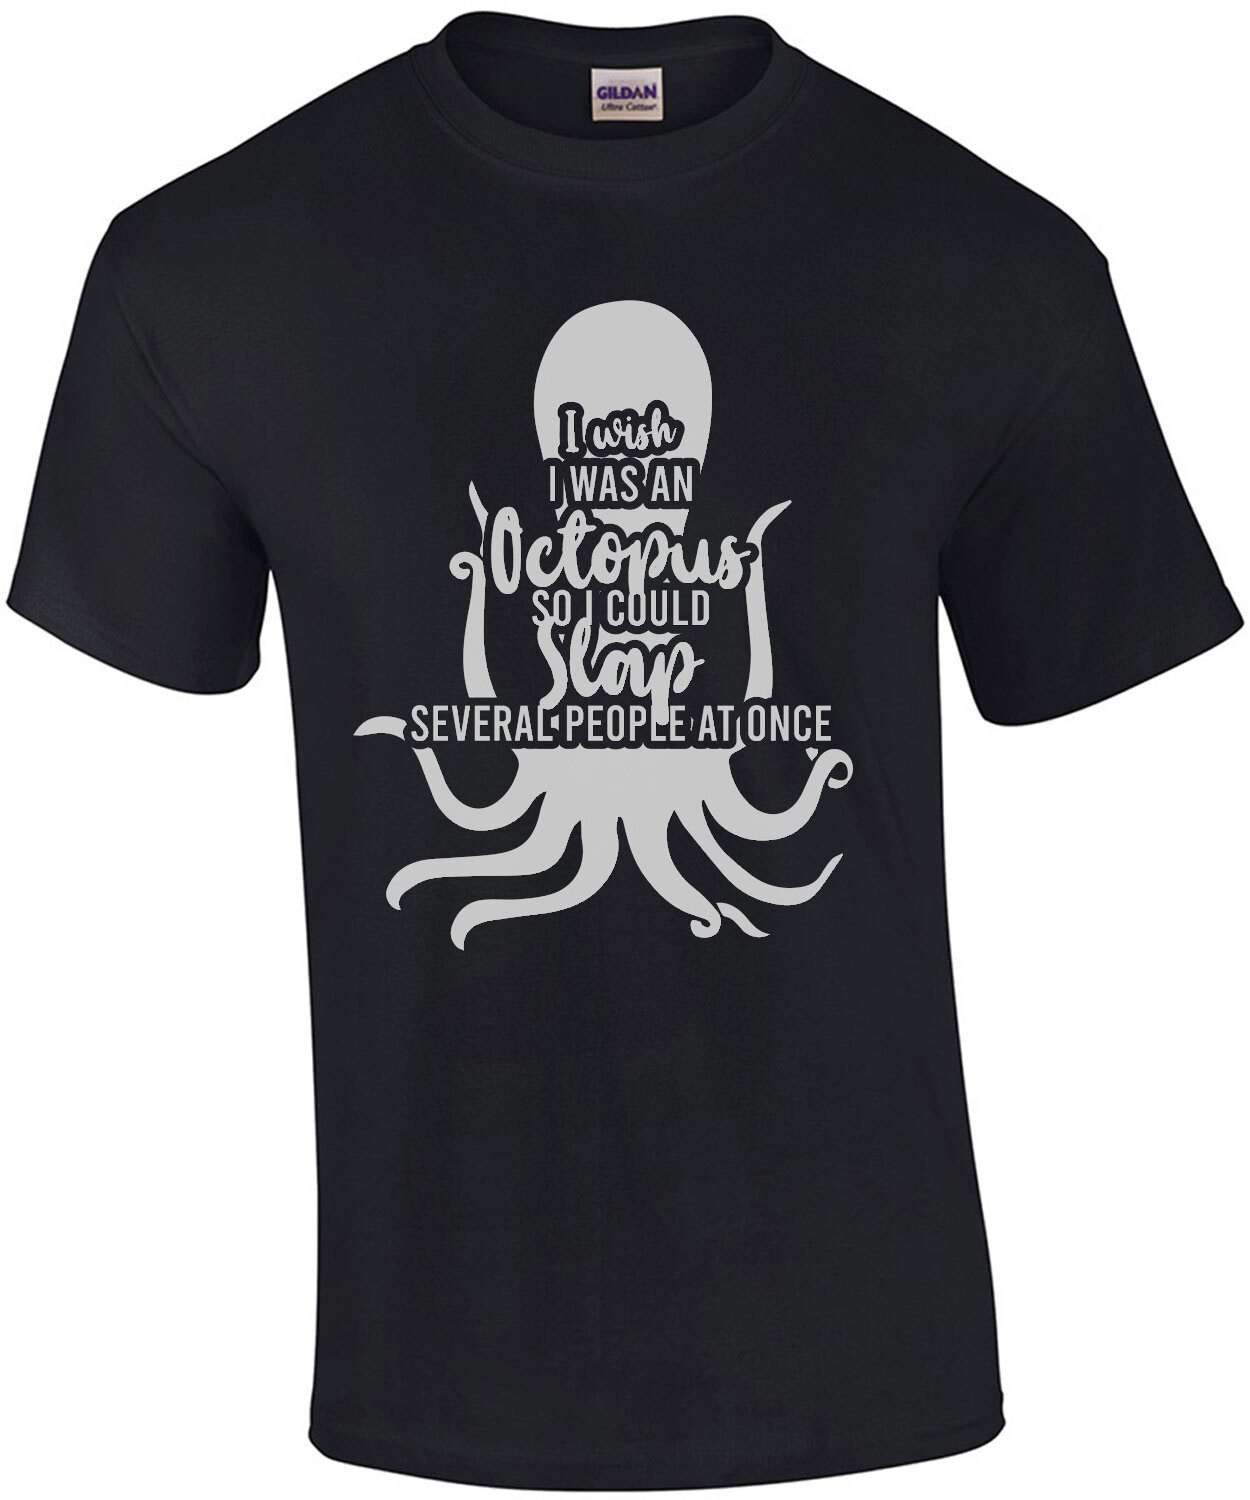 I wish I was an octopus so I could slap several people at once - funny t-shirt